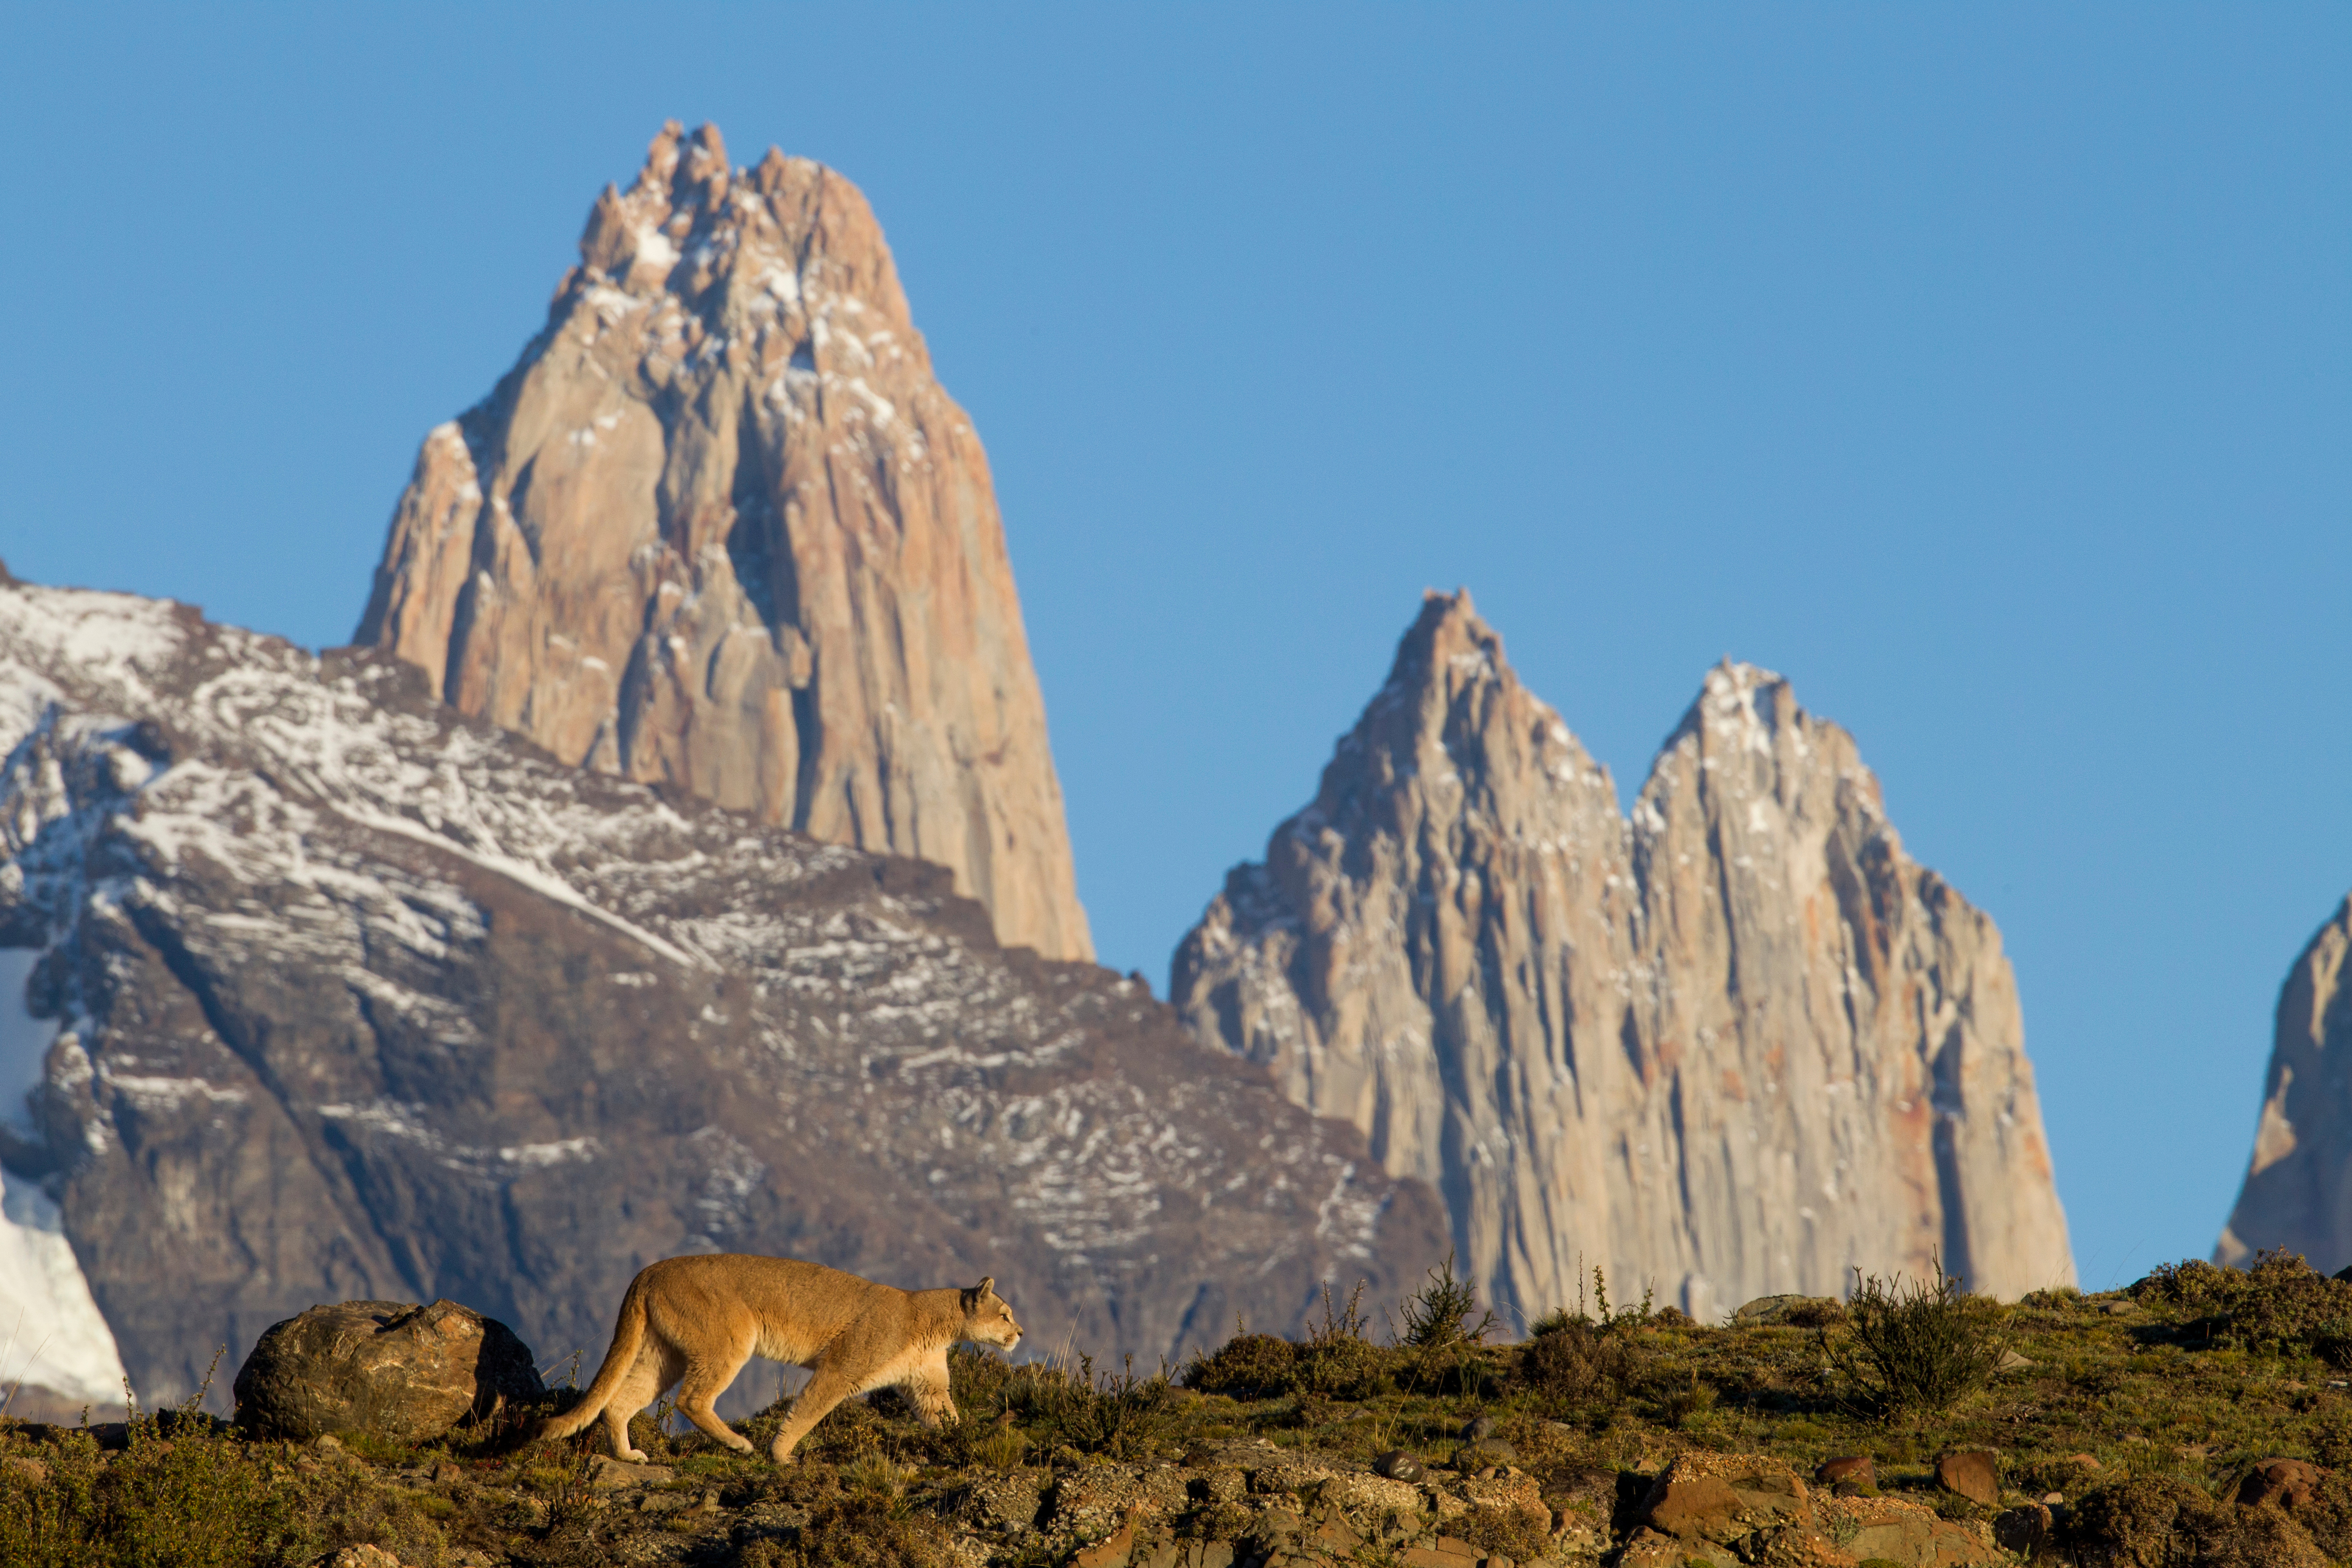 "Mountain Lion in dry puna, Abra Granada, Andes, northwestern Argentina Mountain Lion female in front of mountains, Torres del Paine, Torres del Paine National Park, Patagonia, Chile"